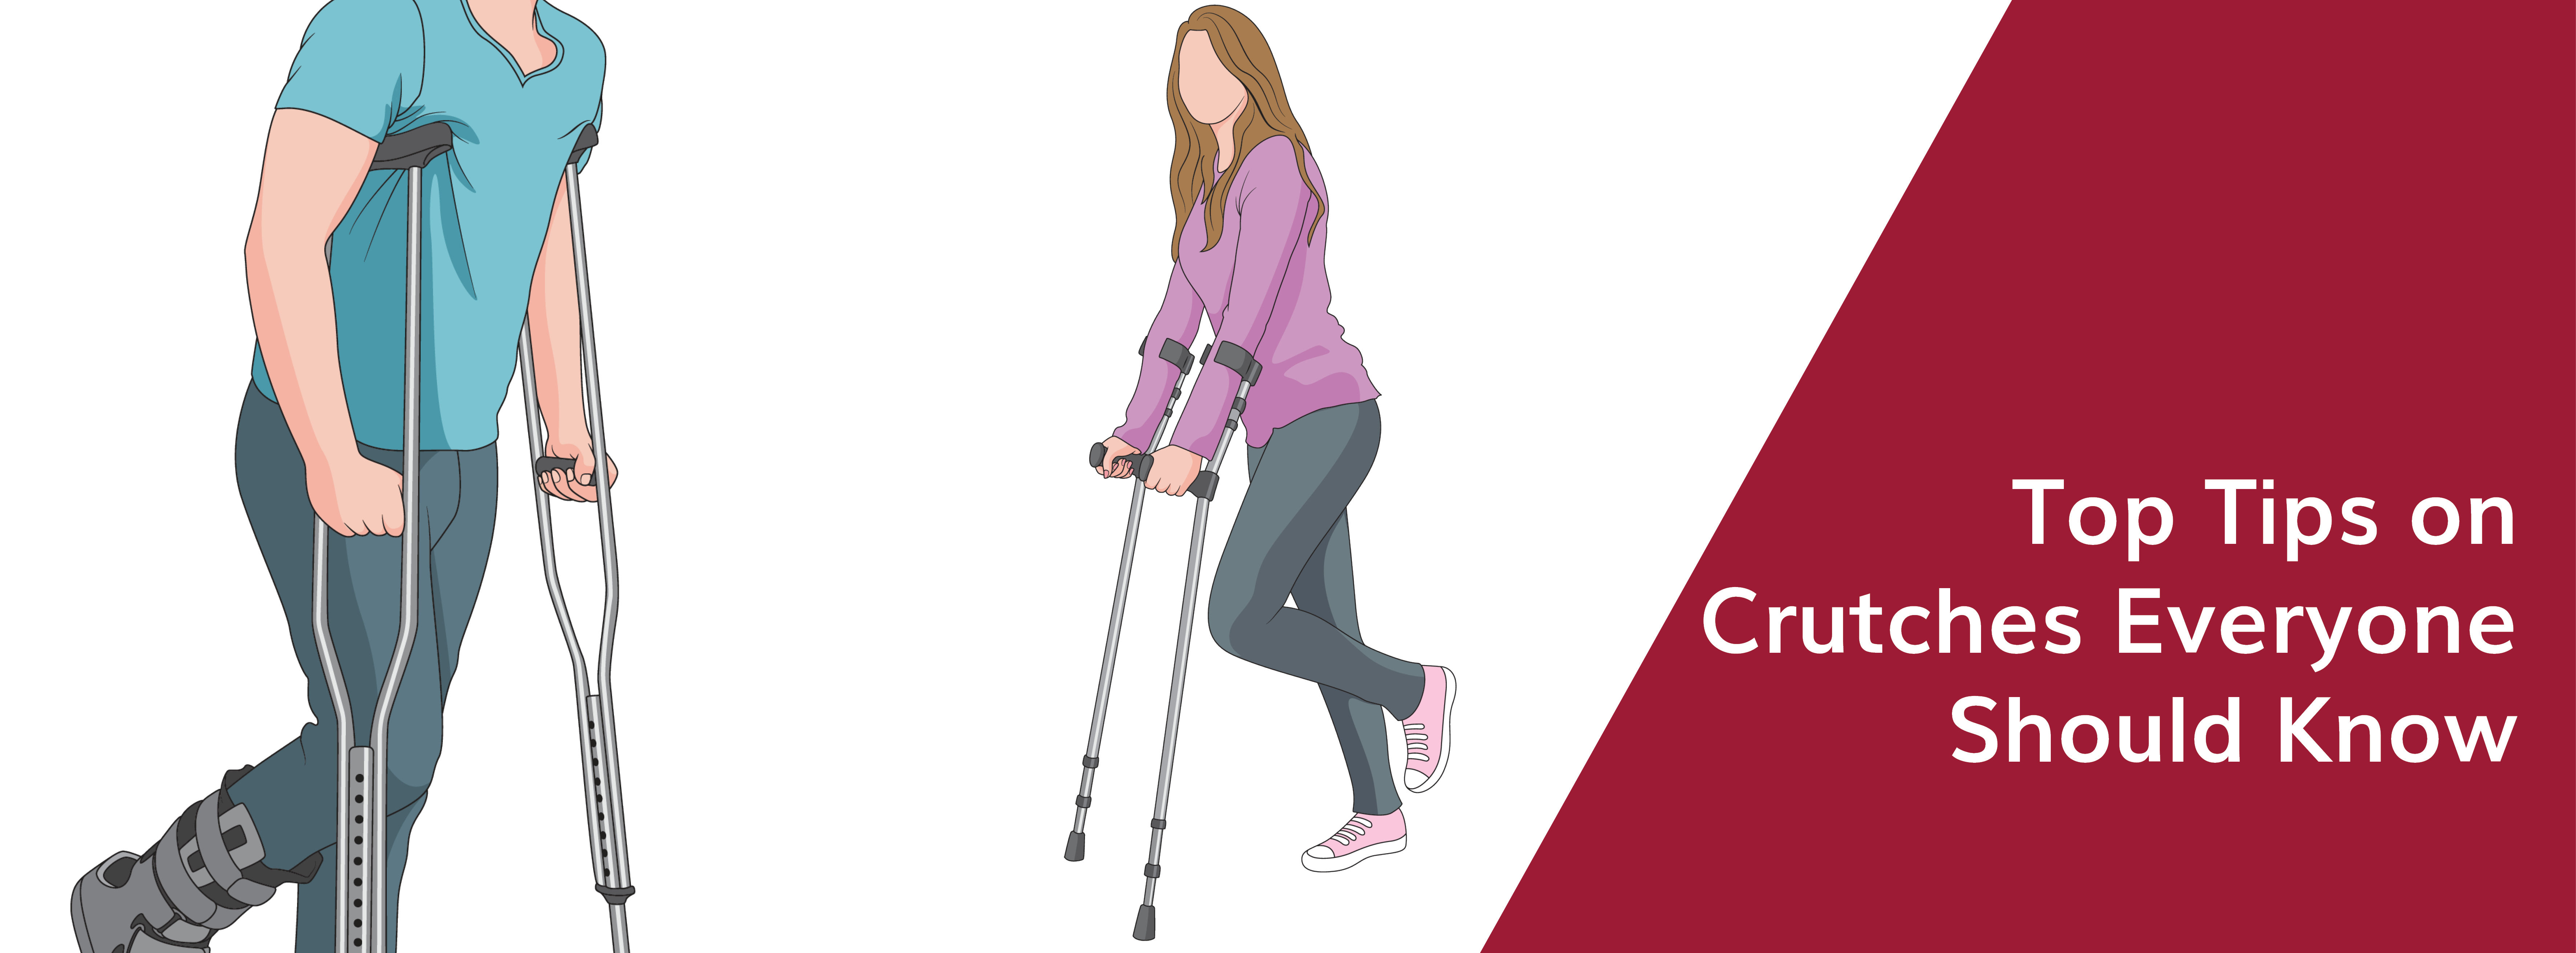 Top tips on crutches everyone should know